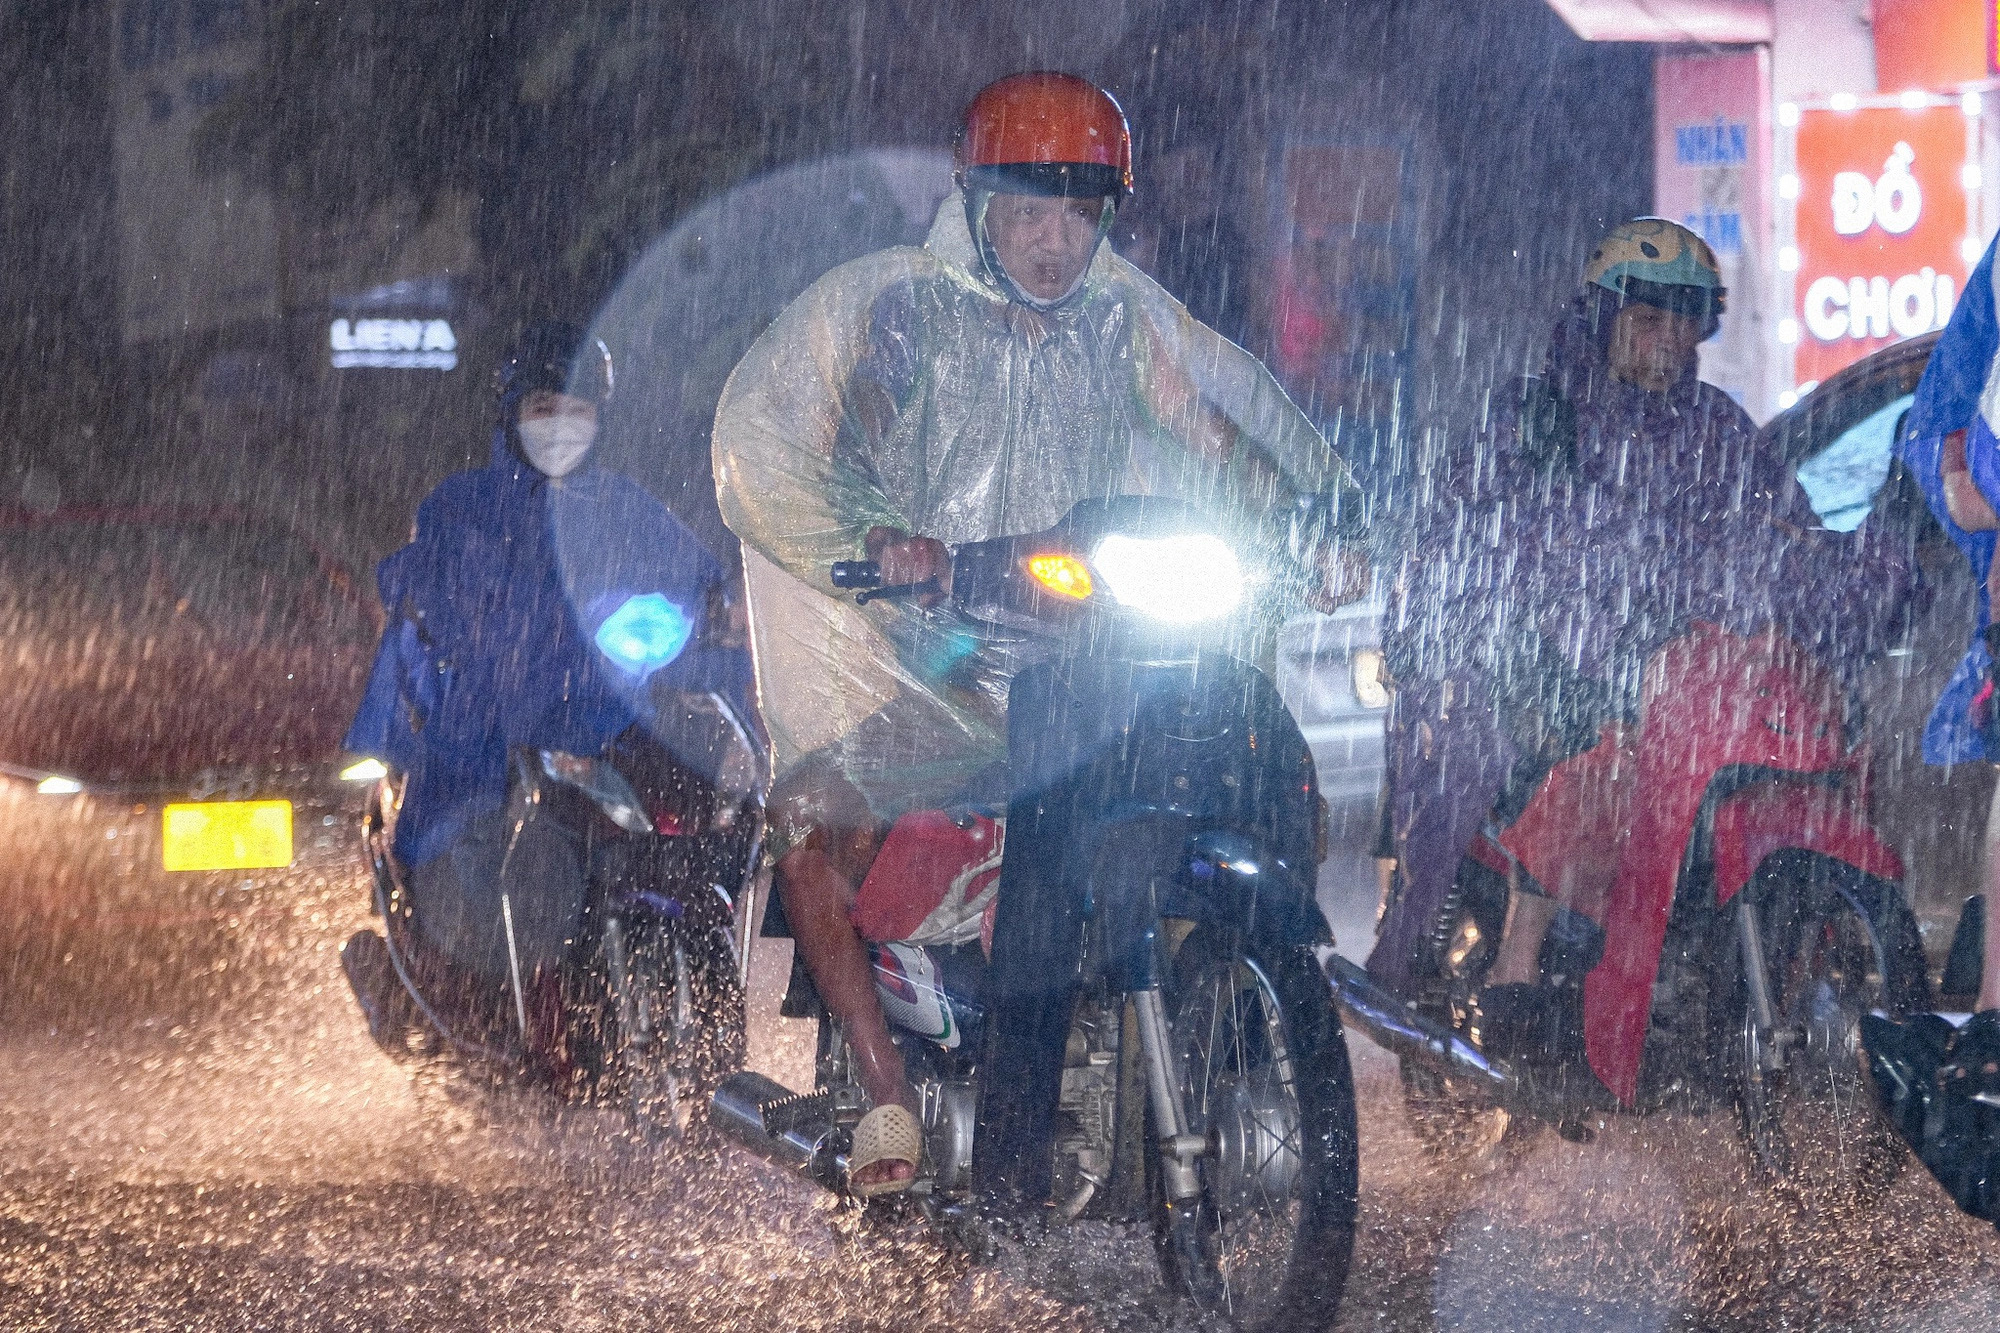 Downpours in northern Vietnam may last through this weekend